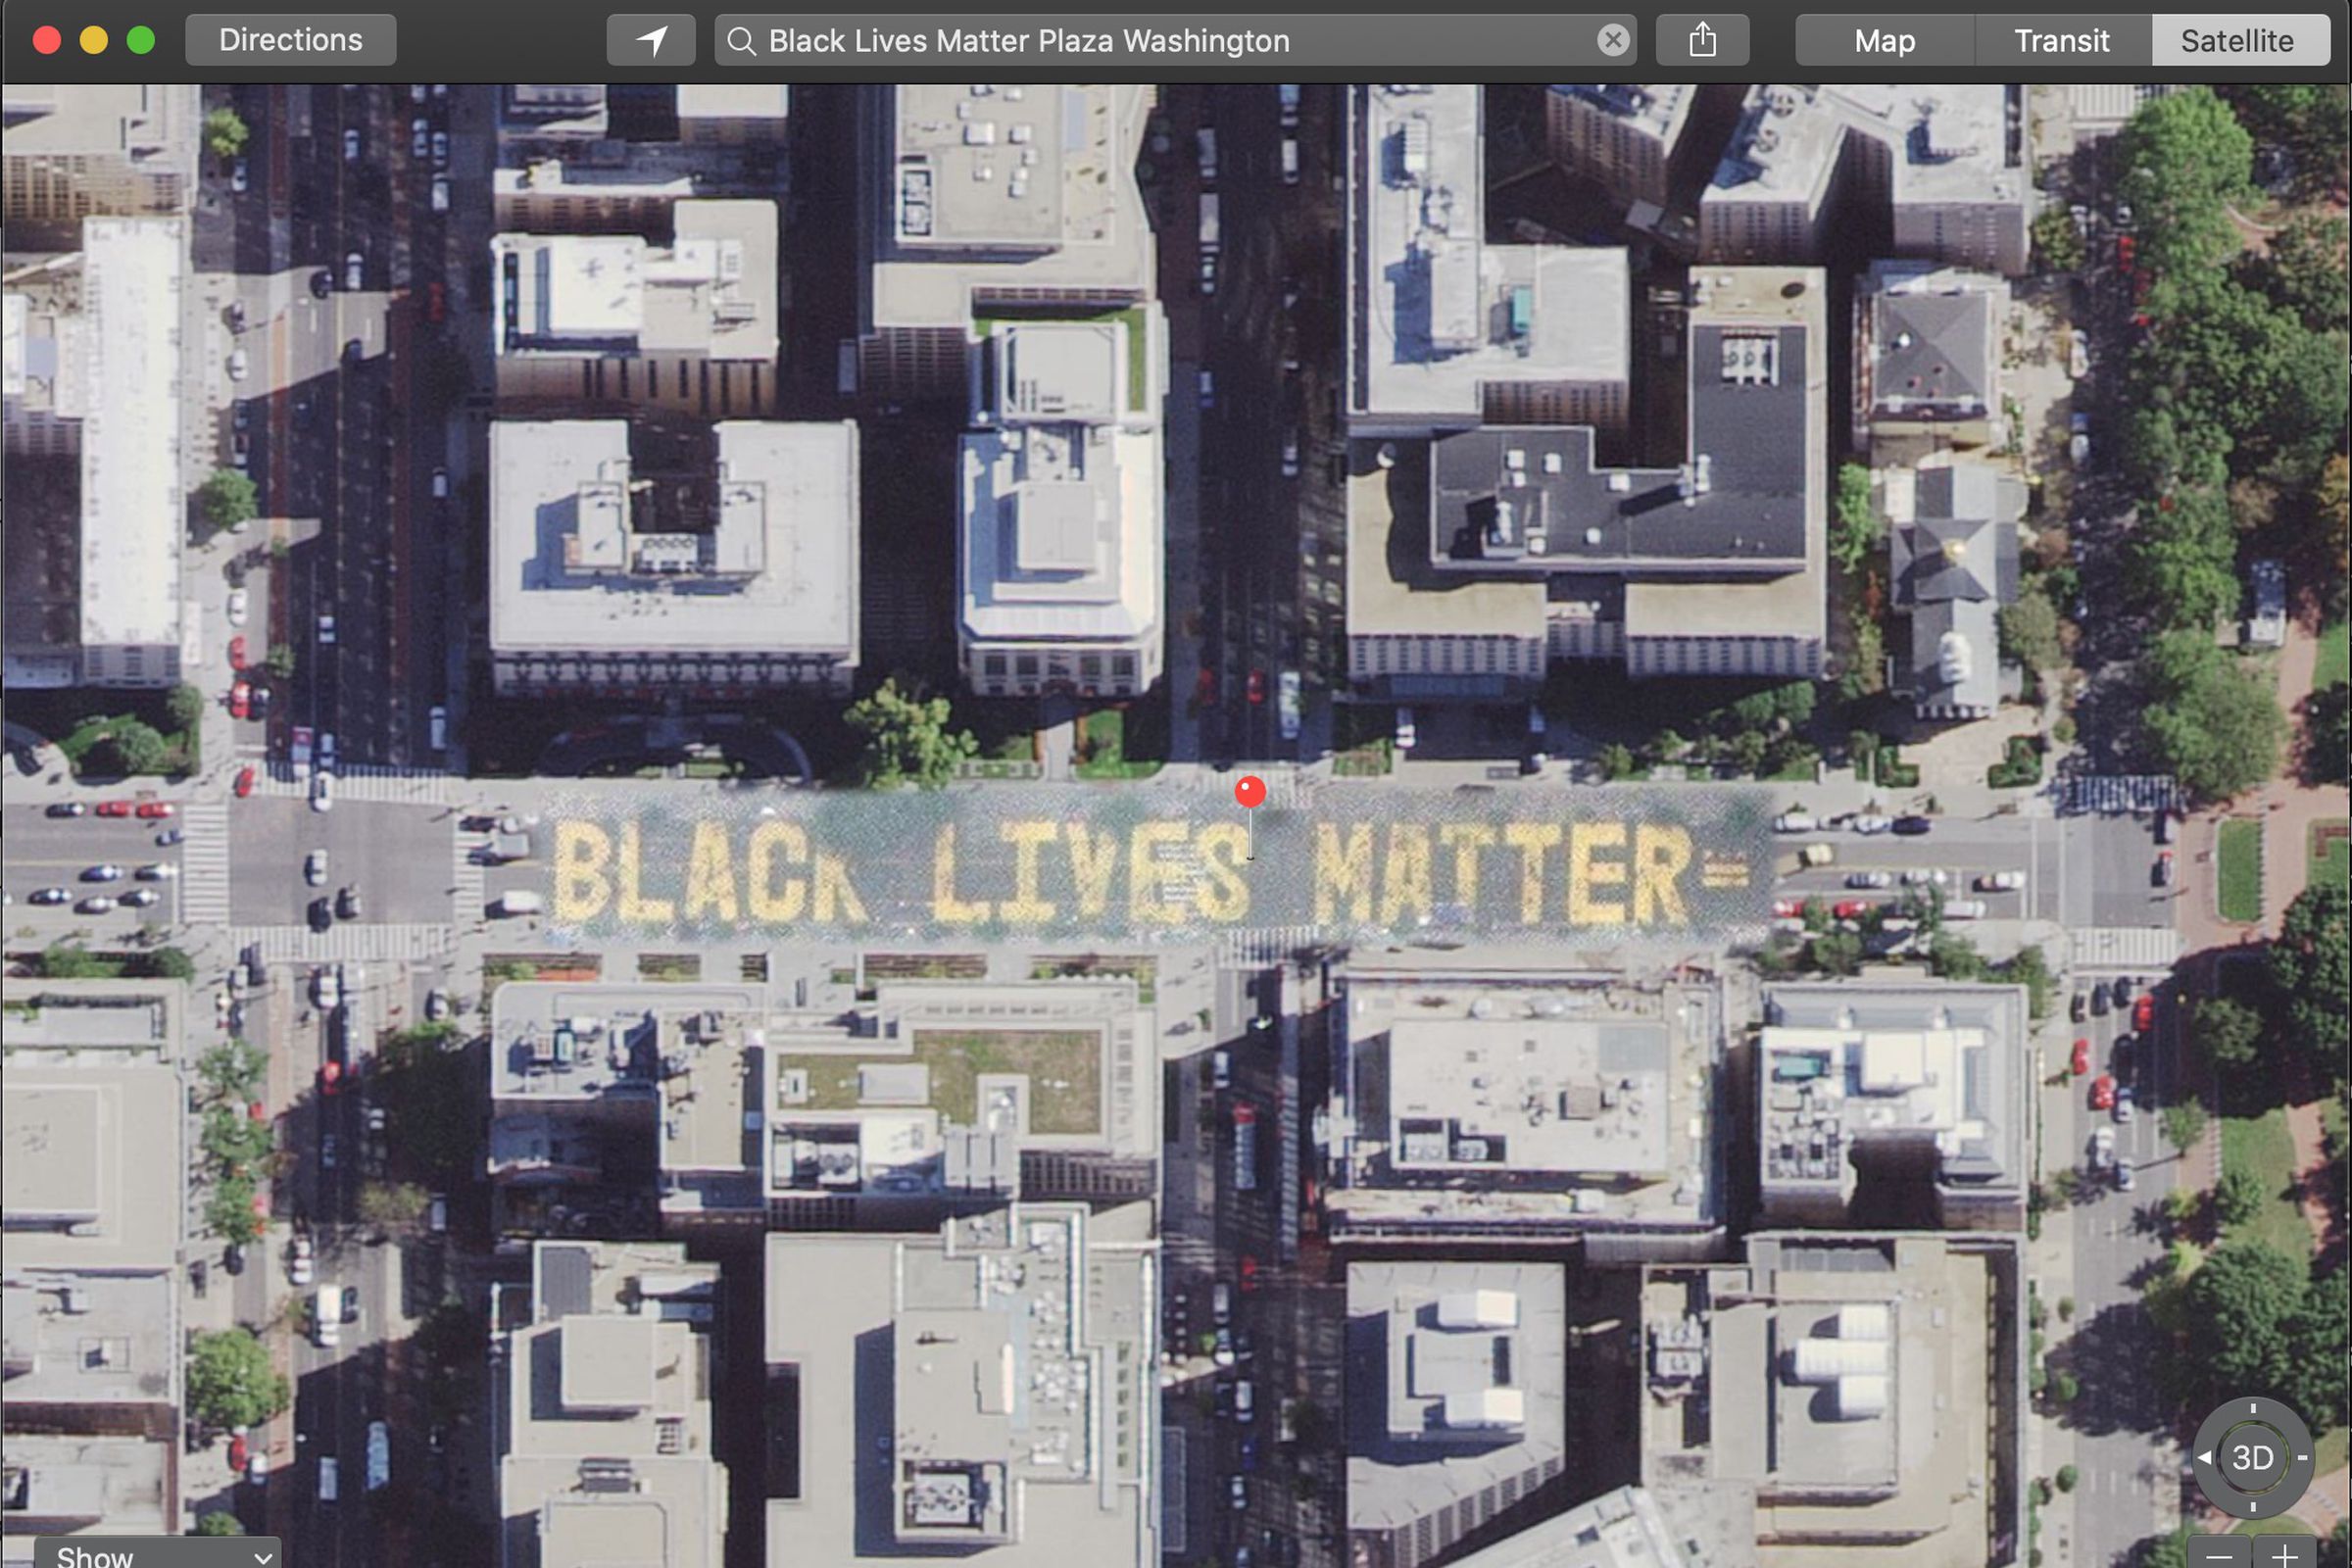 Black Lives Matter Plaza as seen in Apple Maps app on MacOS.